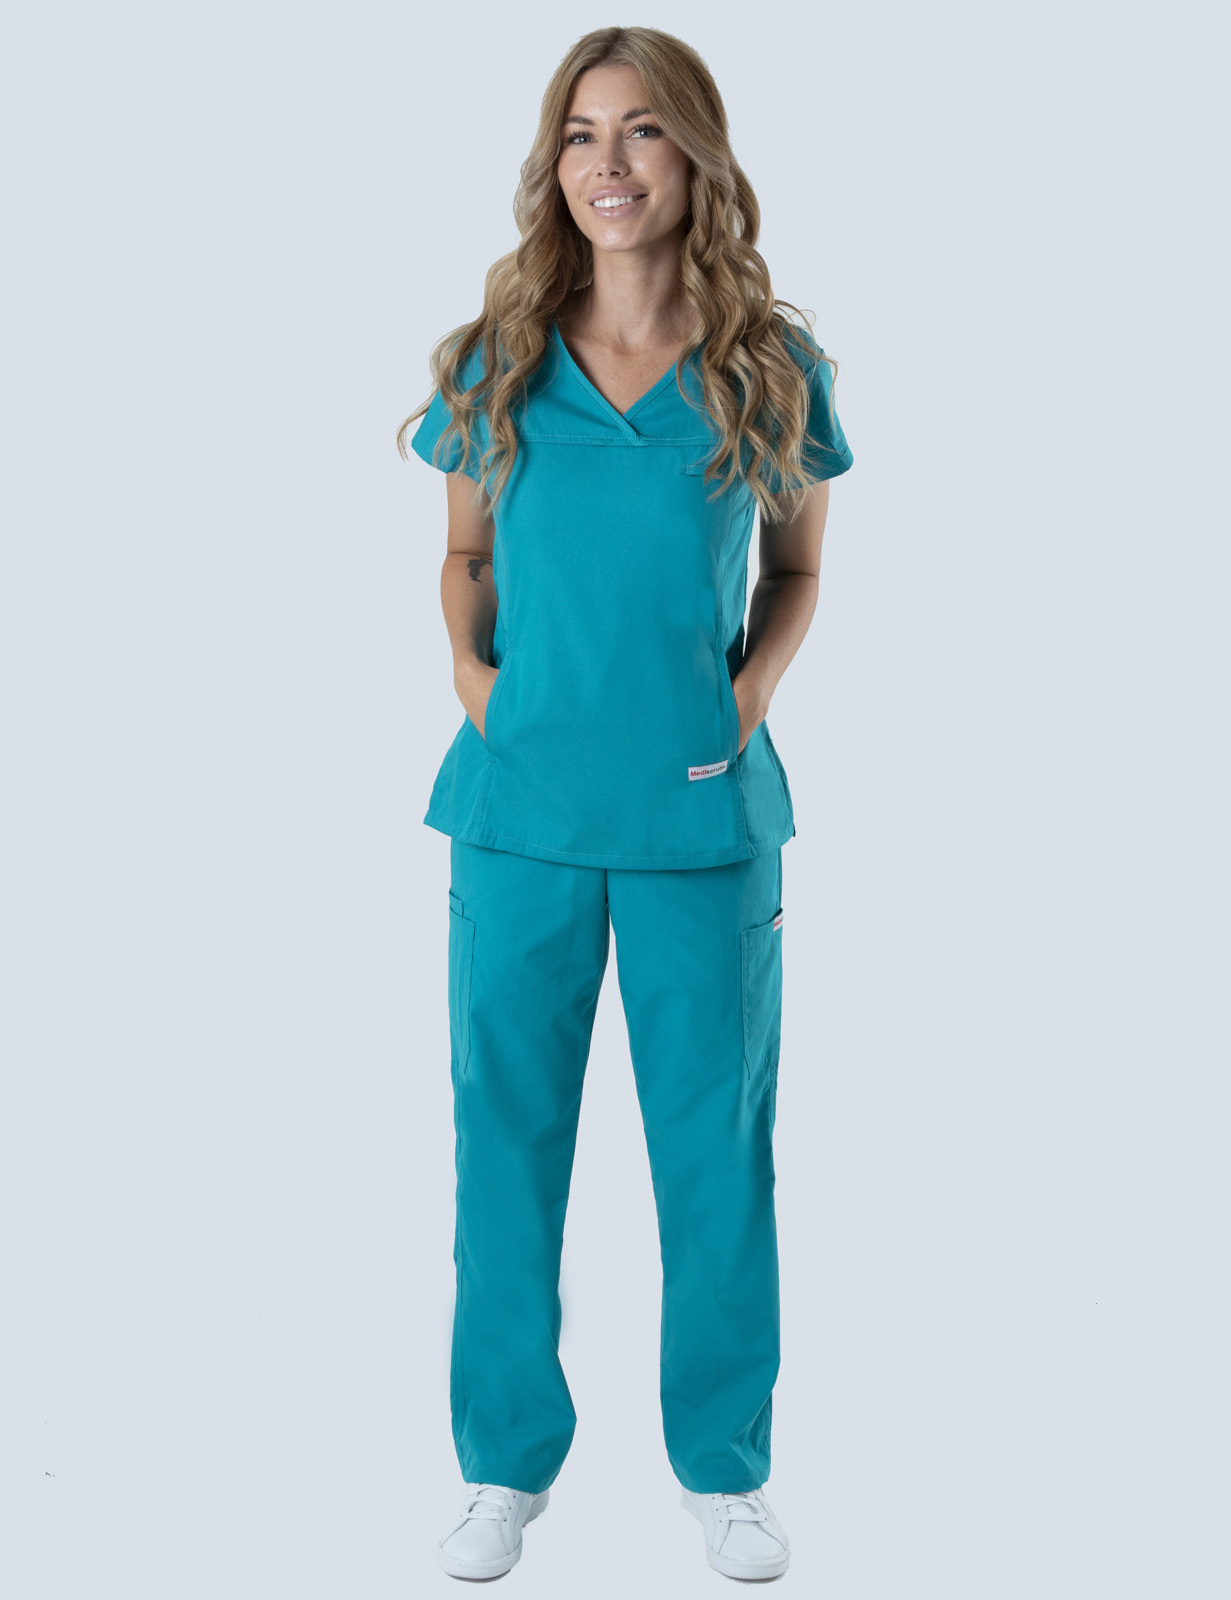 Women's Fit Solid Scrub Top - Teal - 4X large